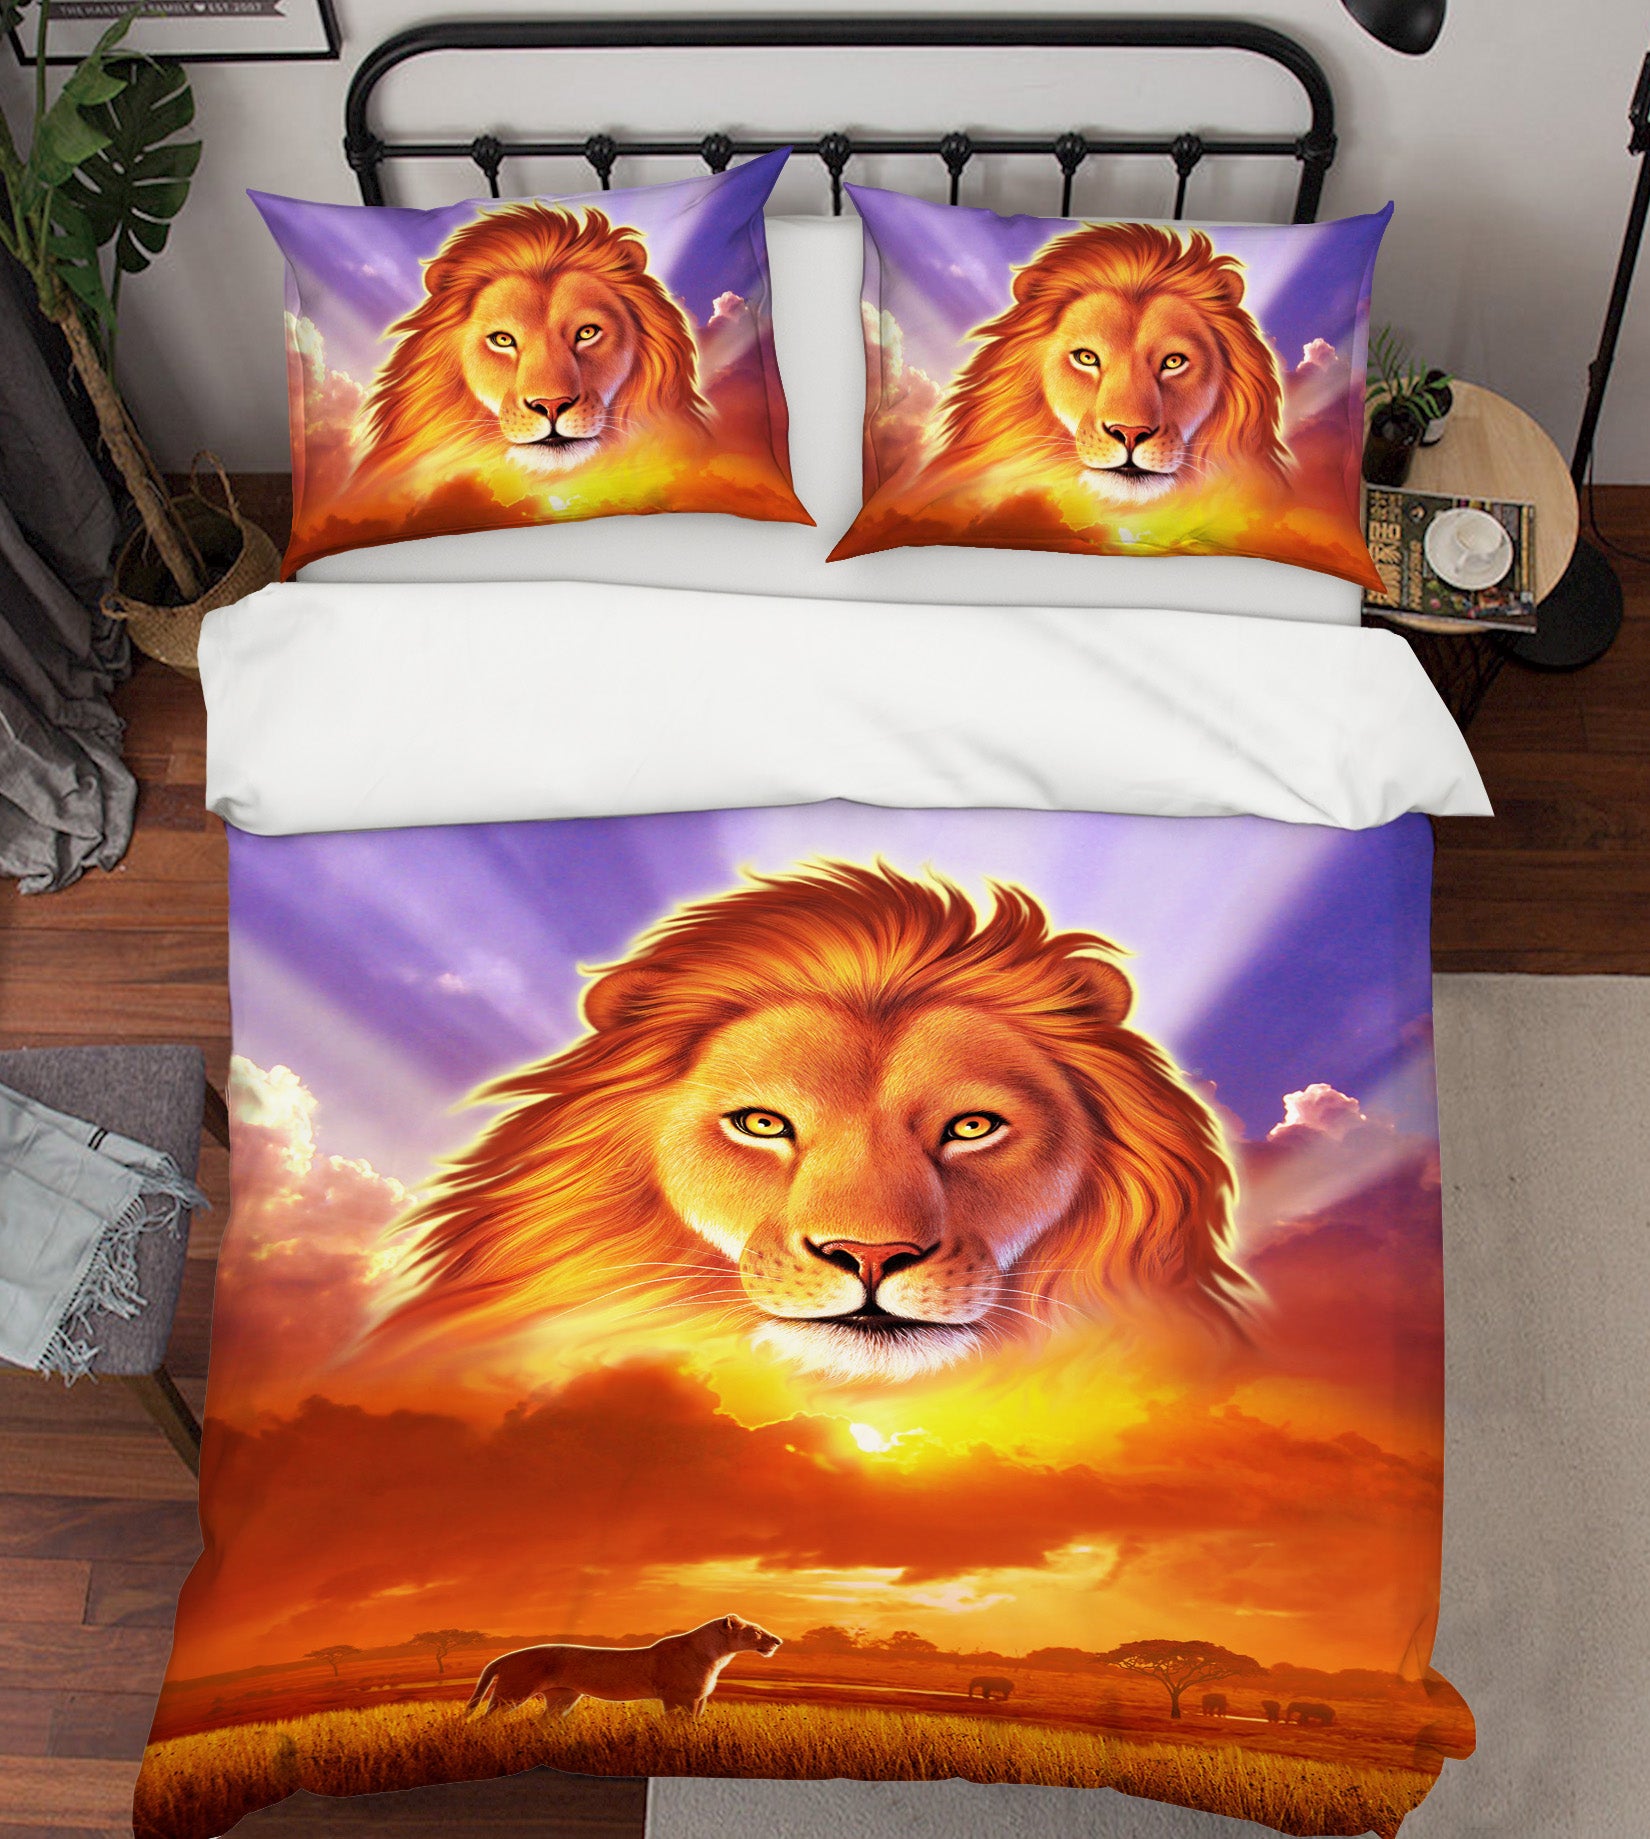 3D Lion King 2126 Jerry LoFaro bedding Bed Pillowcases Quilt